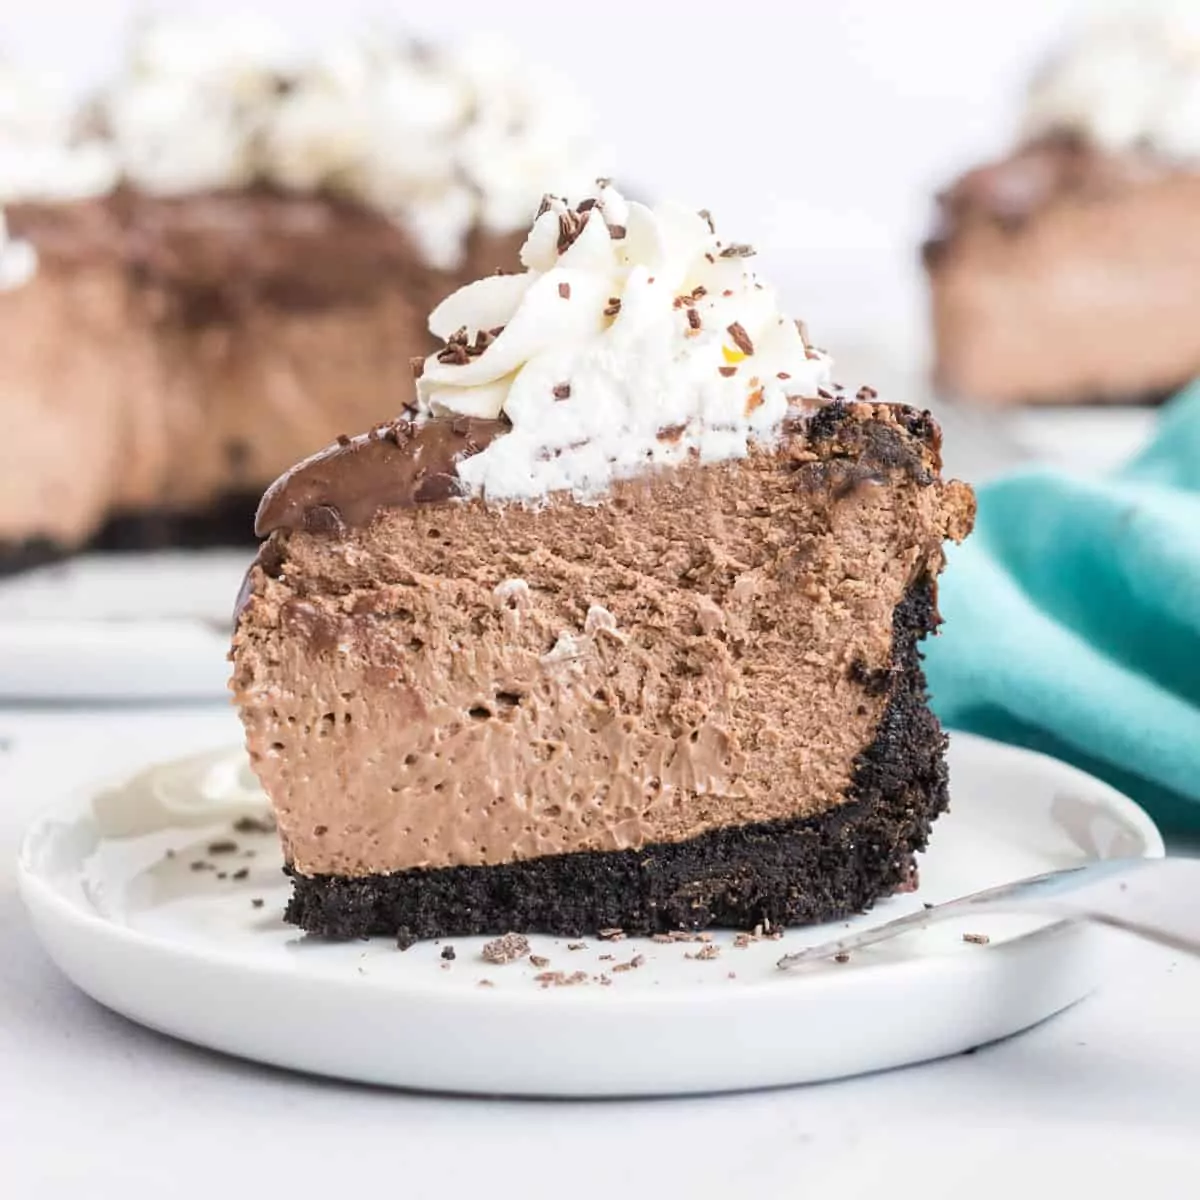 thick slice of chocolate cheesecake with whipped cream topping.